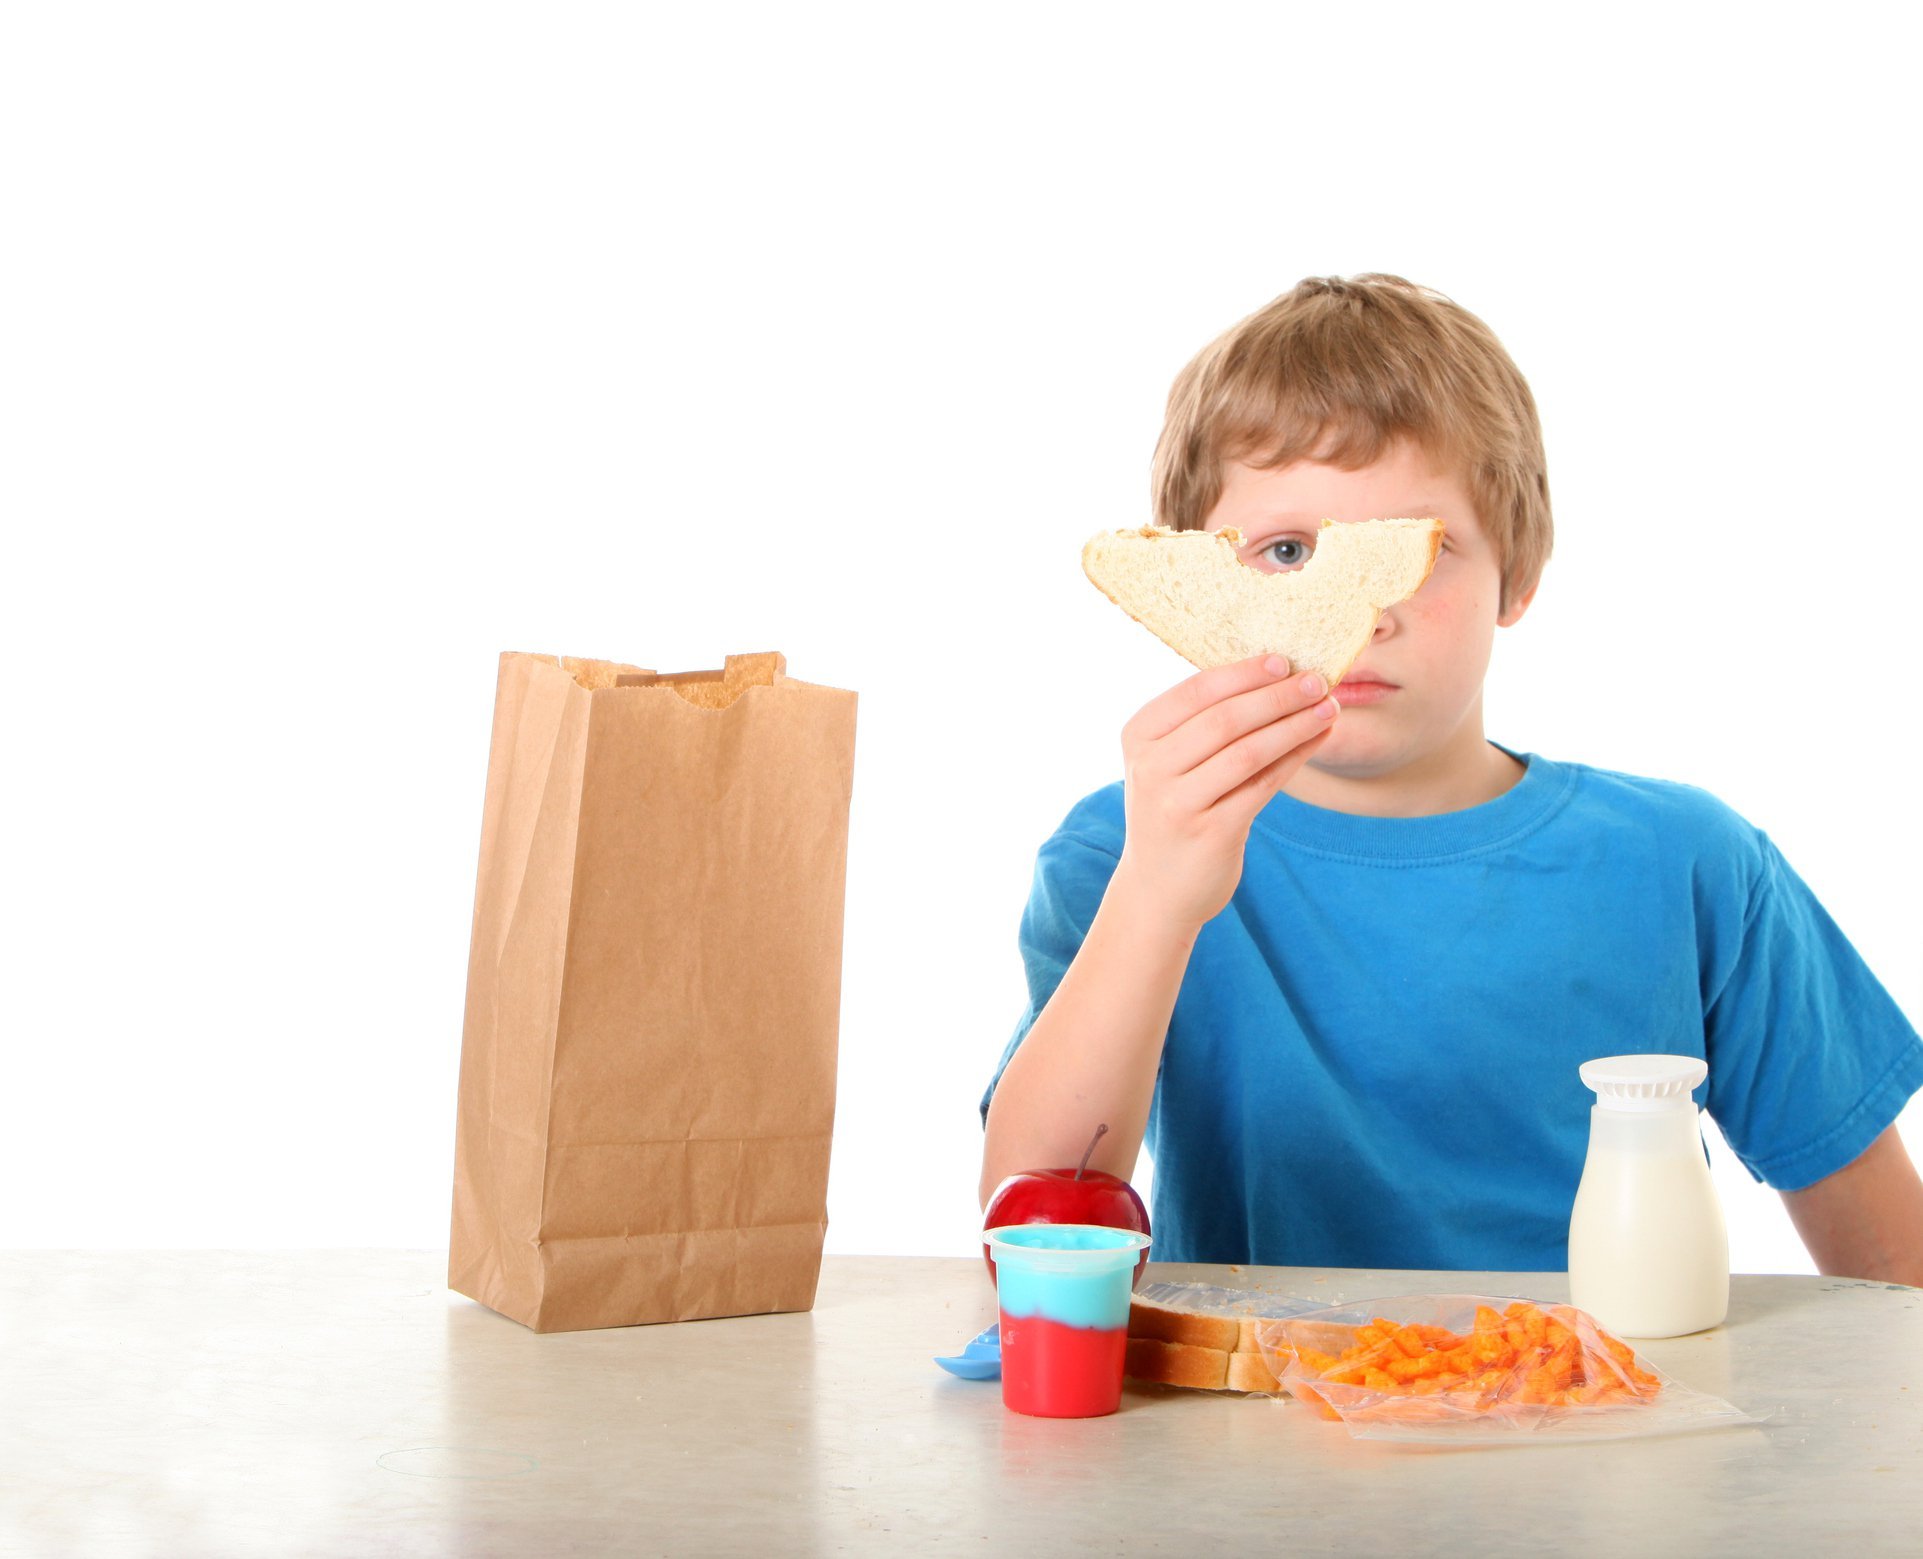 Boy at table eating an unhealthy packed school lunch